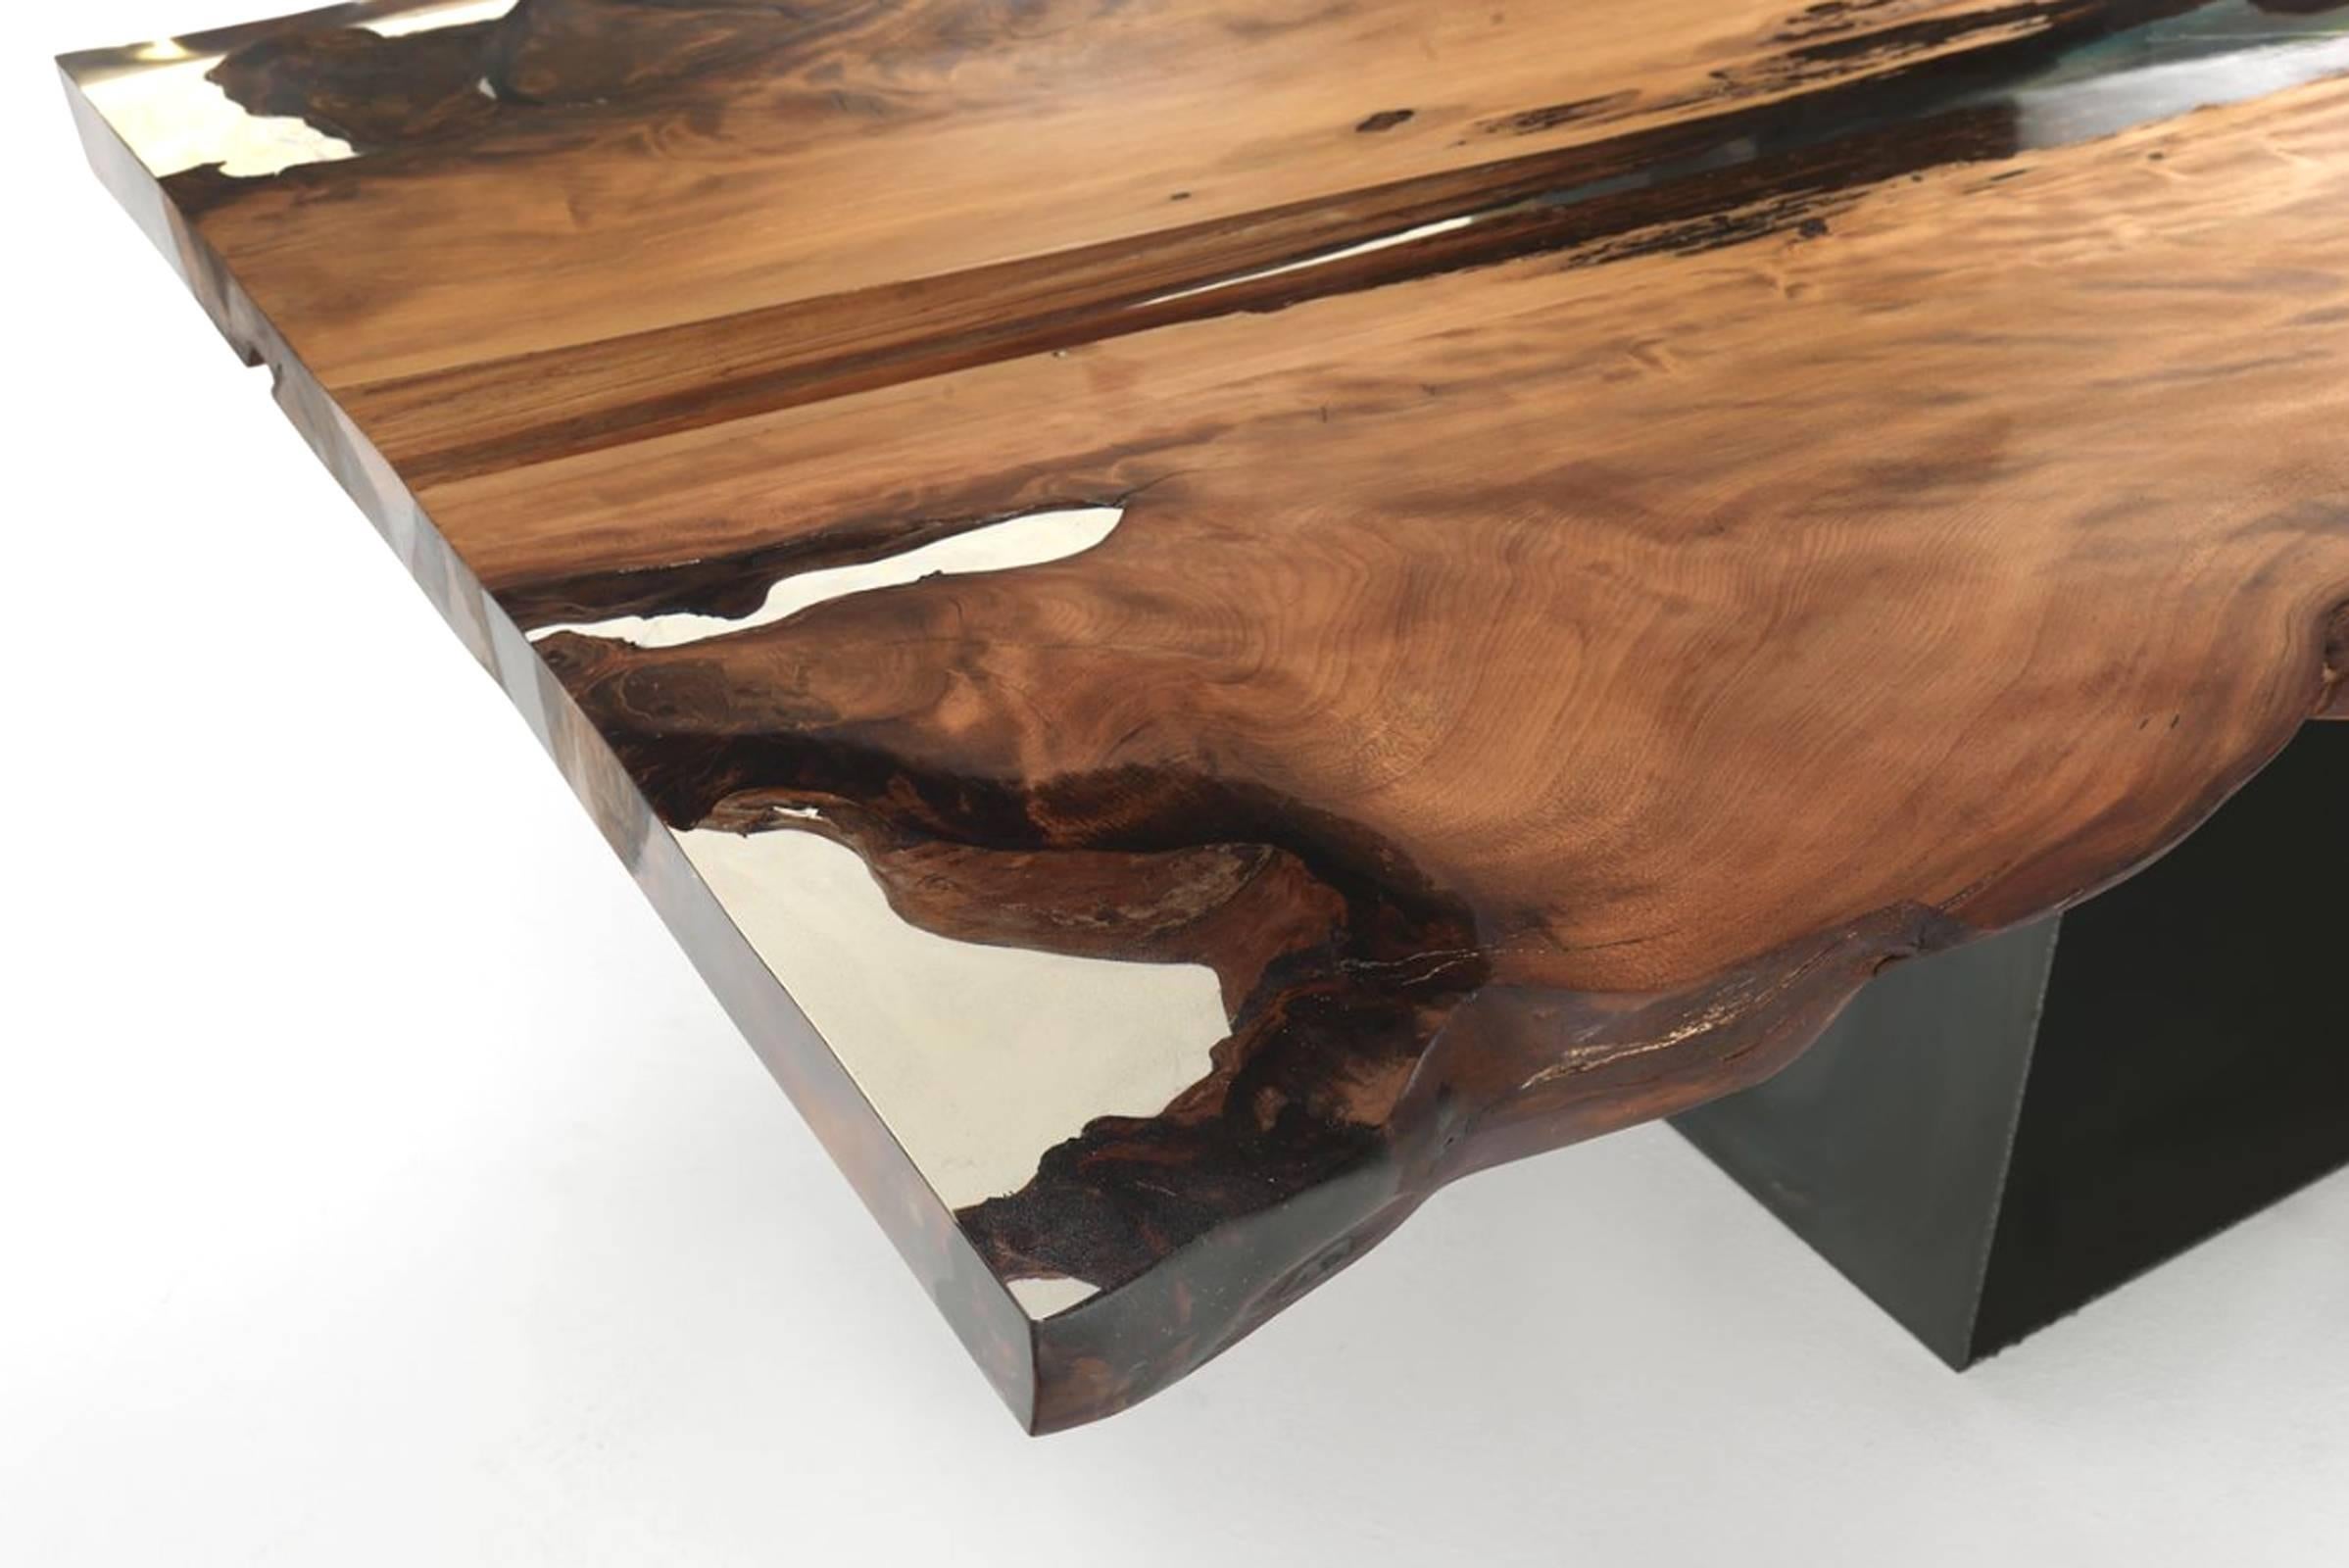 Hand-Carved Table Cuadra with Walnut Top and Acrylic Glass on Irondust Anthracite Grey Base